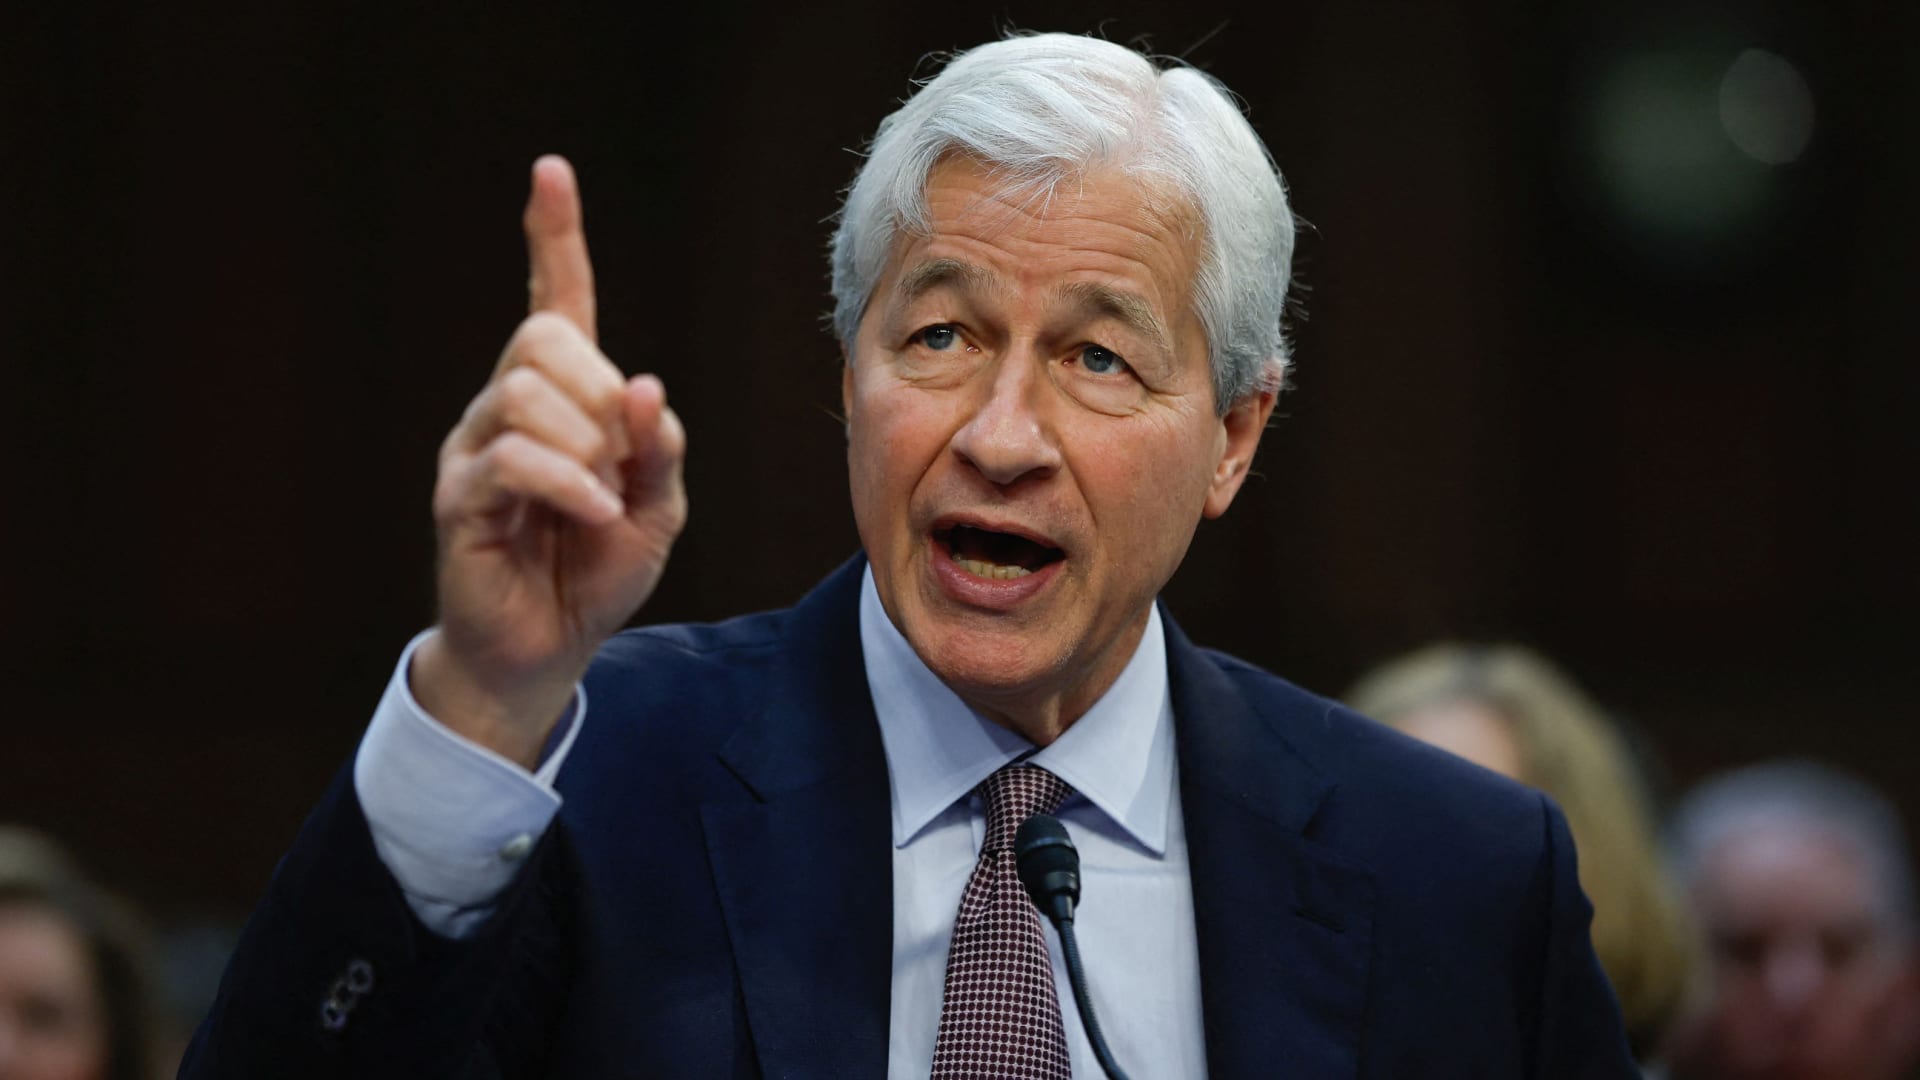 JPMorgan CEO Jamie Dimon urges U.S. to deal with its fiscal deficit [Video]